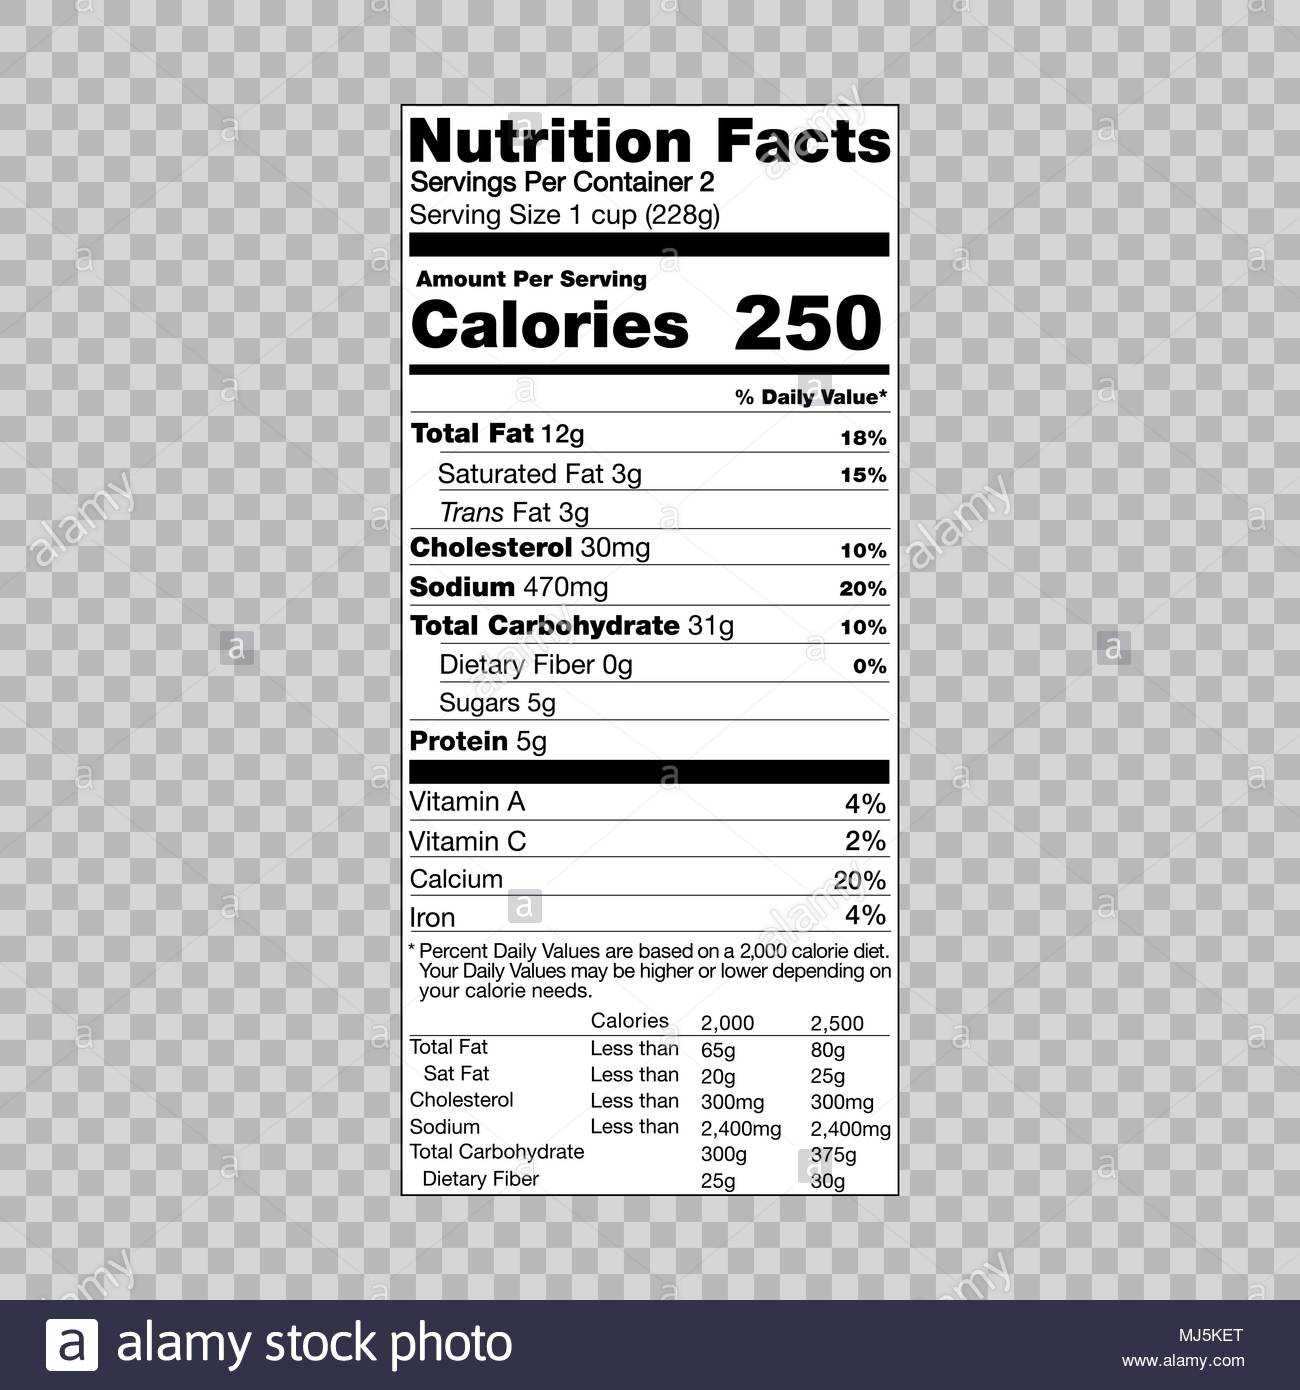 Nutrition Facts Information Template For Food Label Stock Regarding Blank Food Label Template